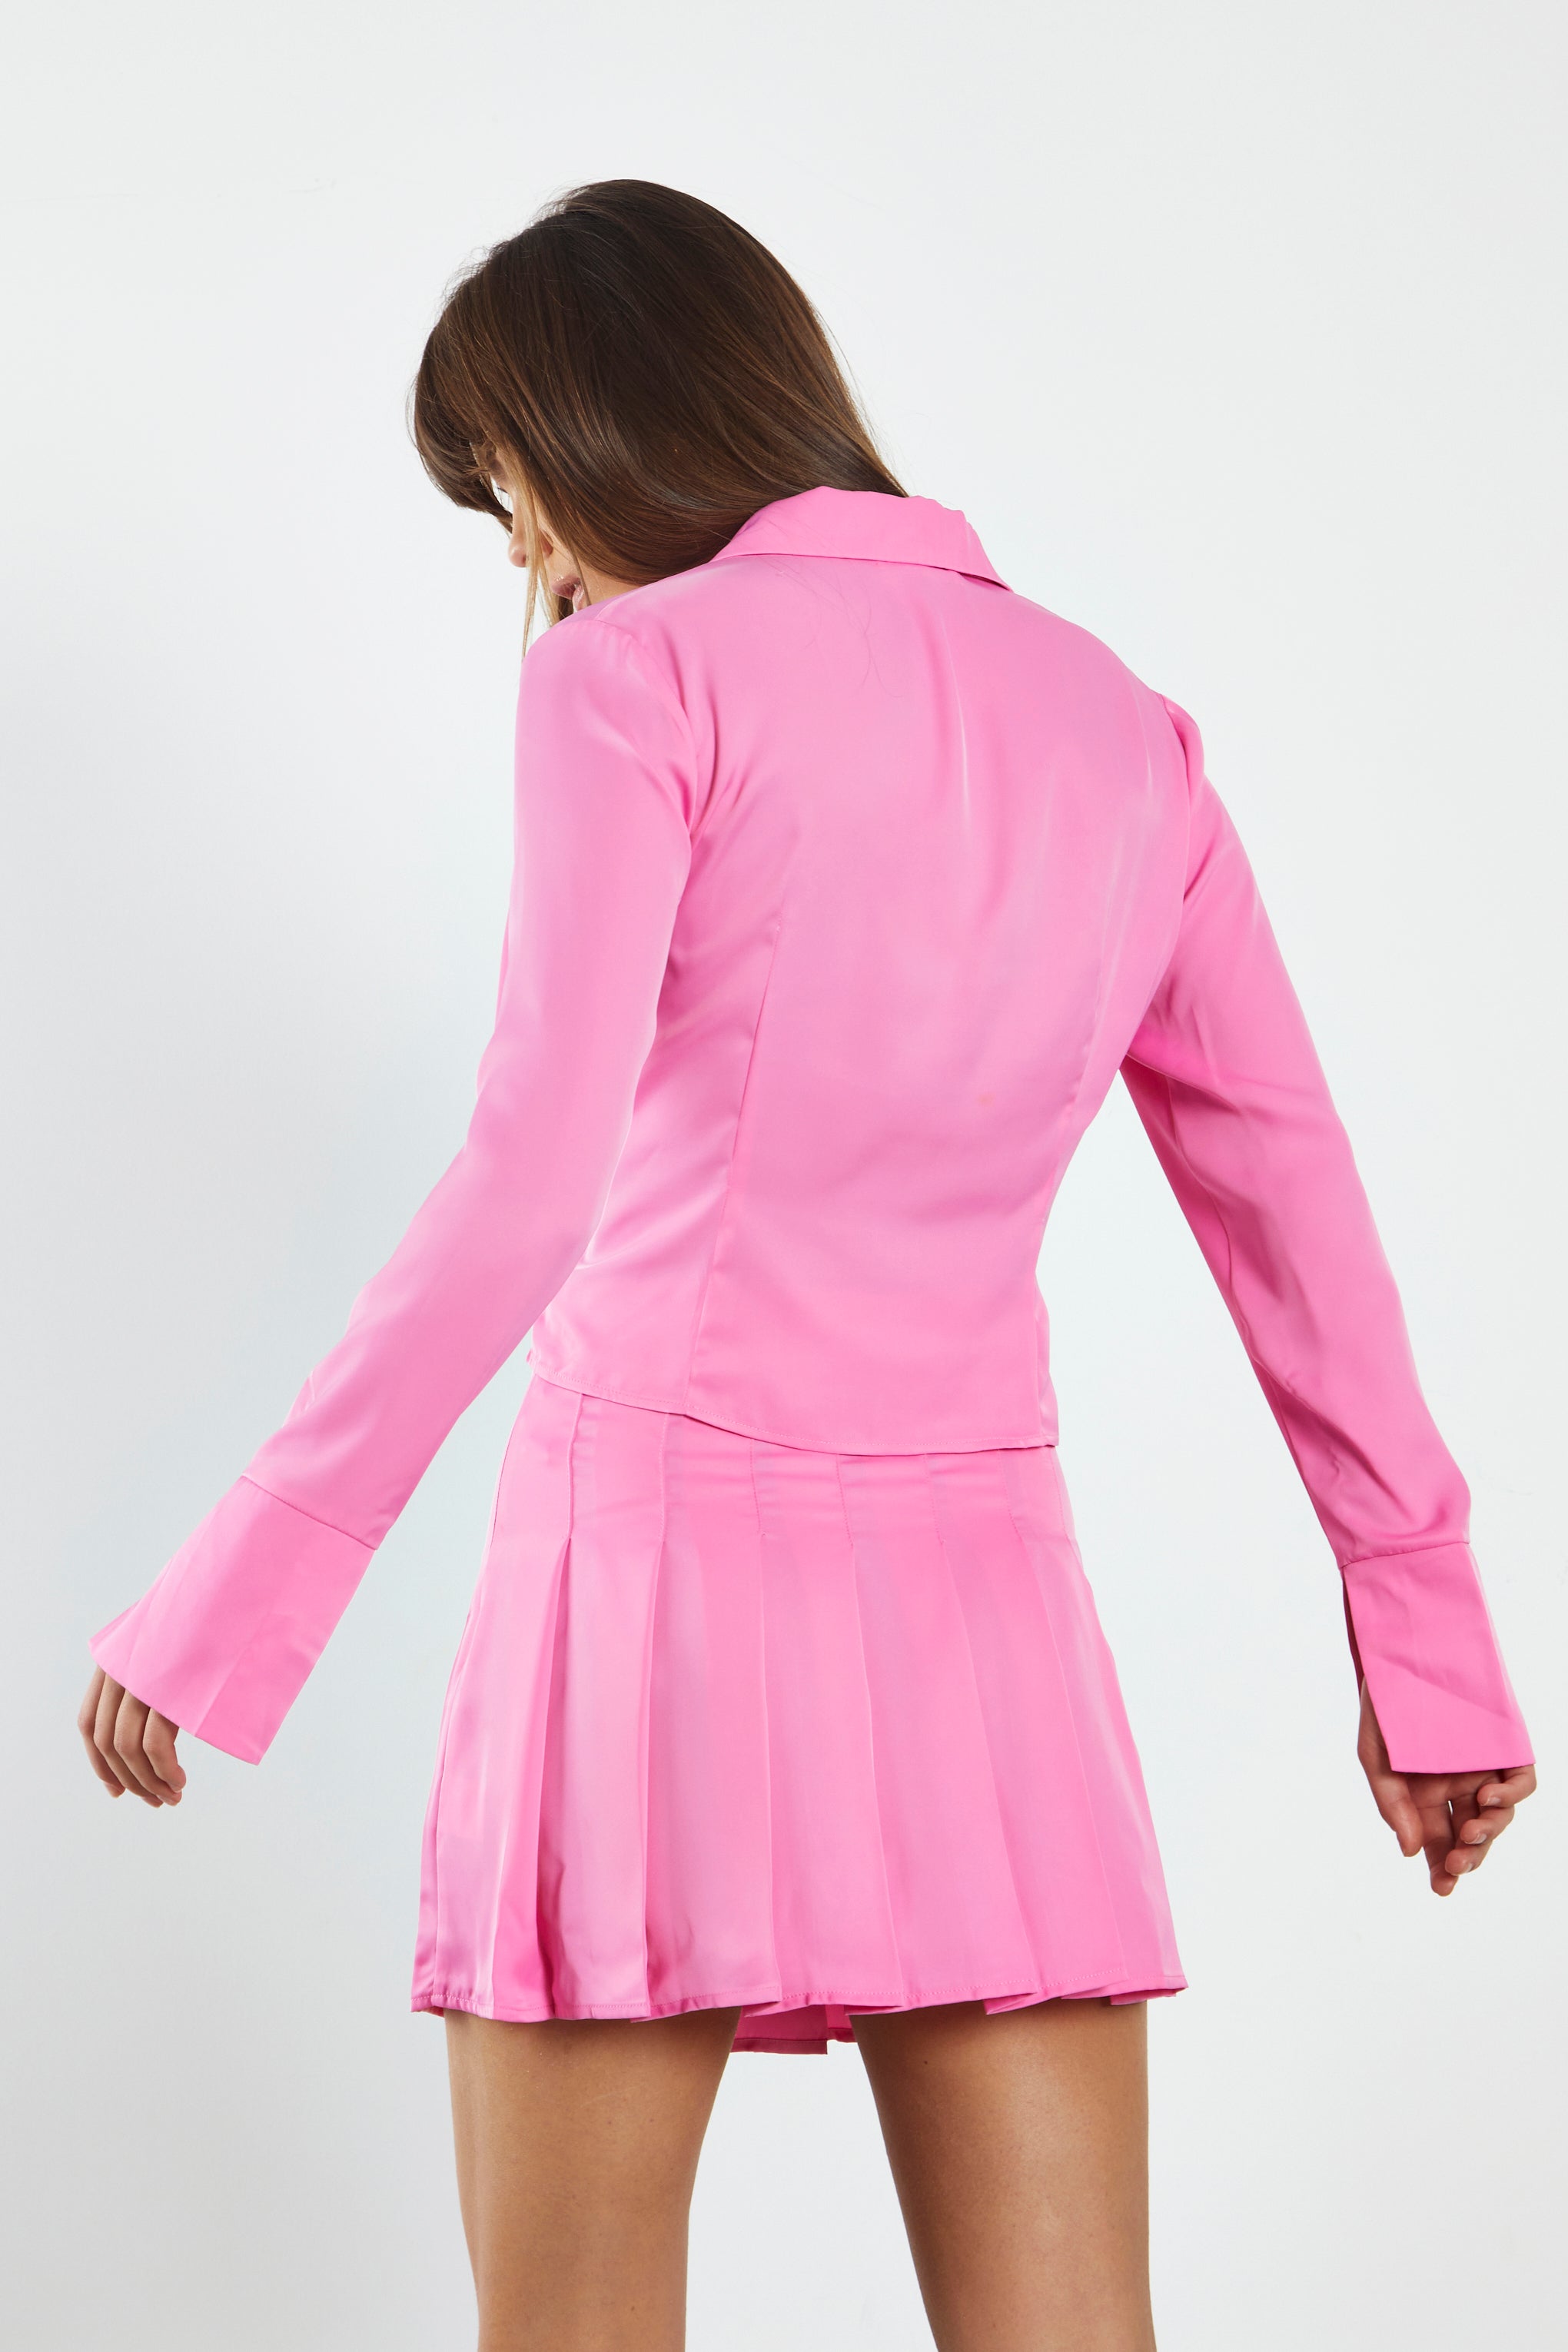 Glamorous Pink Satin Long Sleeve Fitted Shirt with Lapel Collar